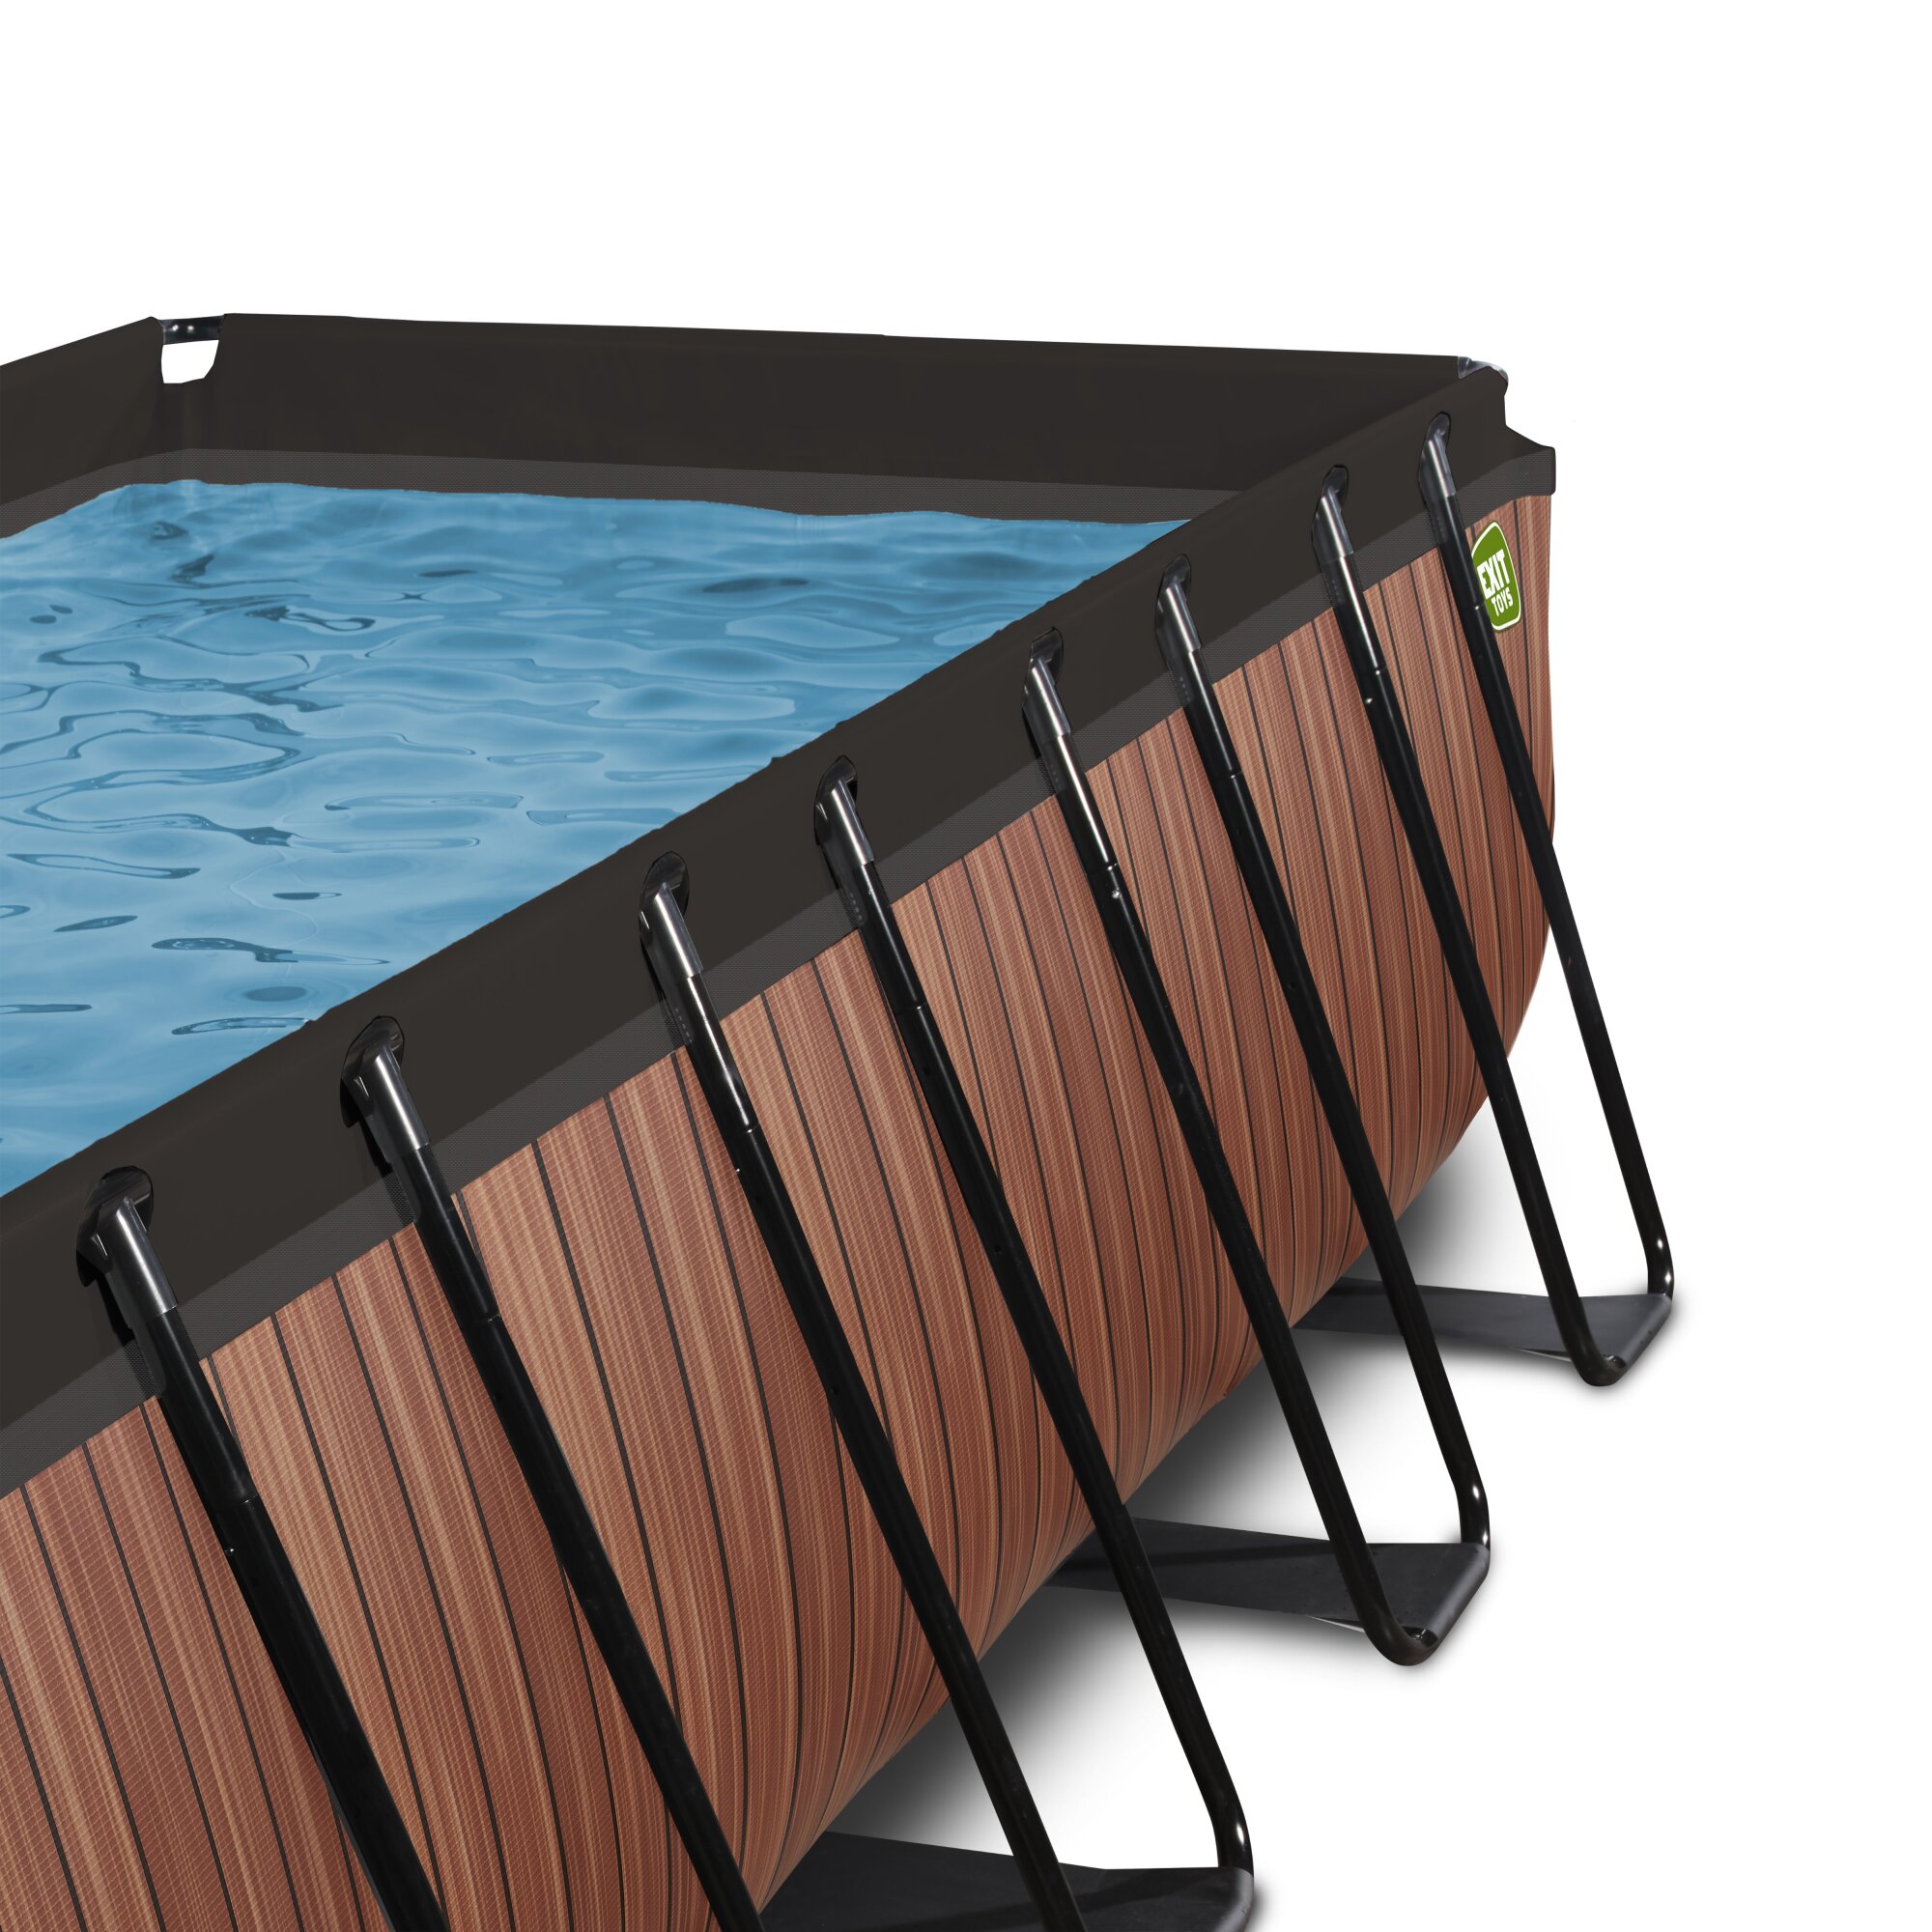 EXIT Wood pool 400x200x100cm with filter pump - brown